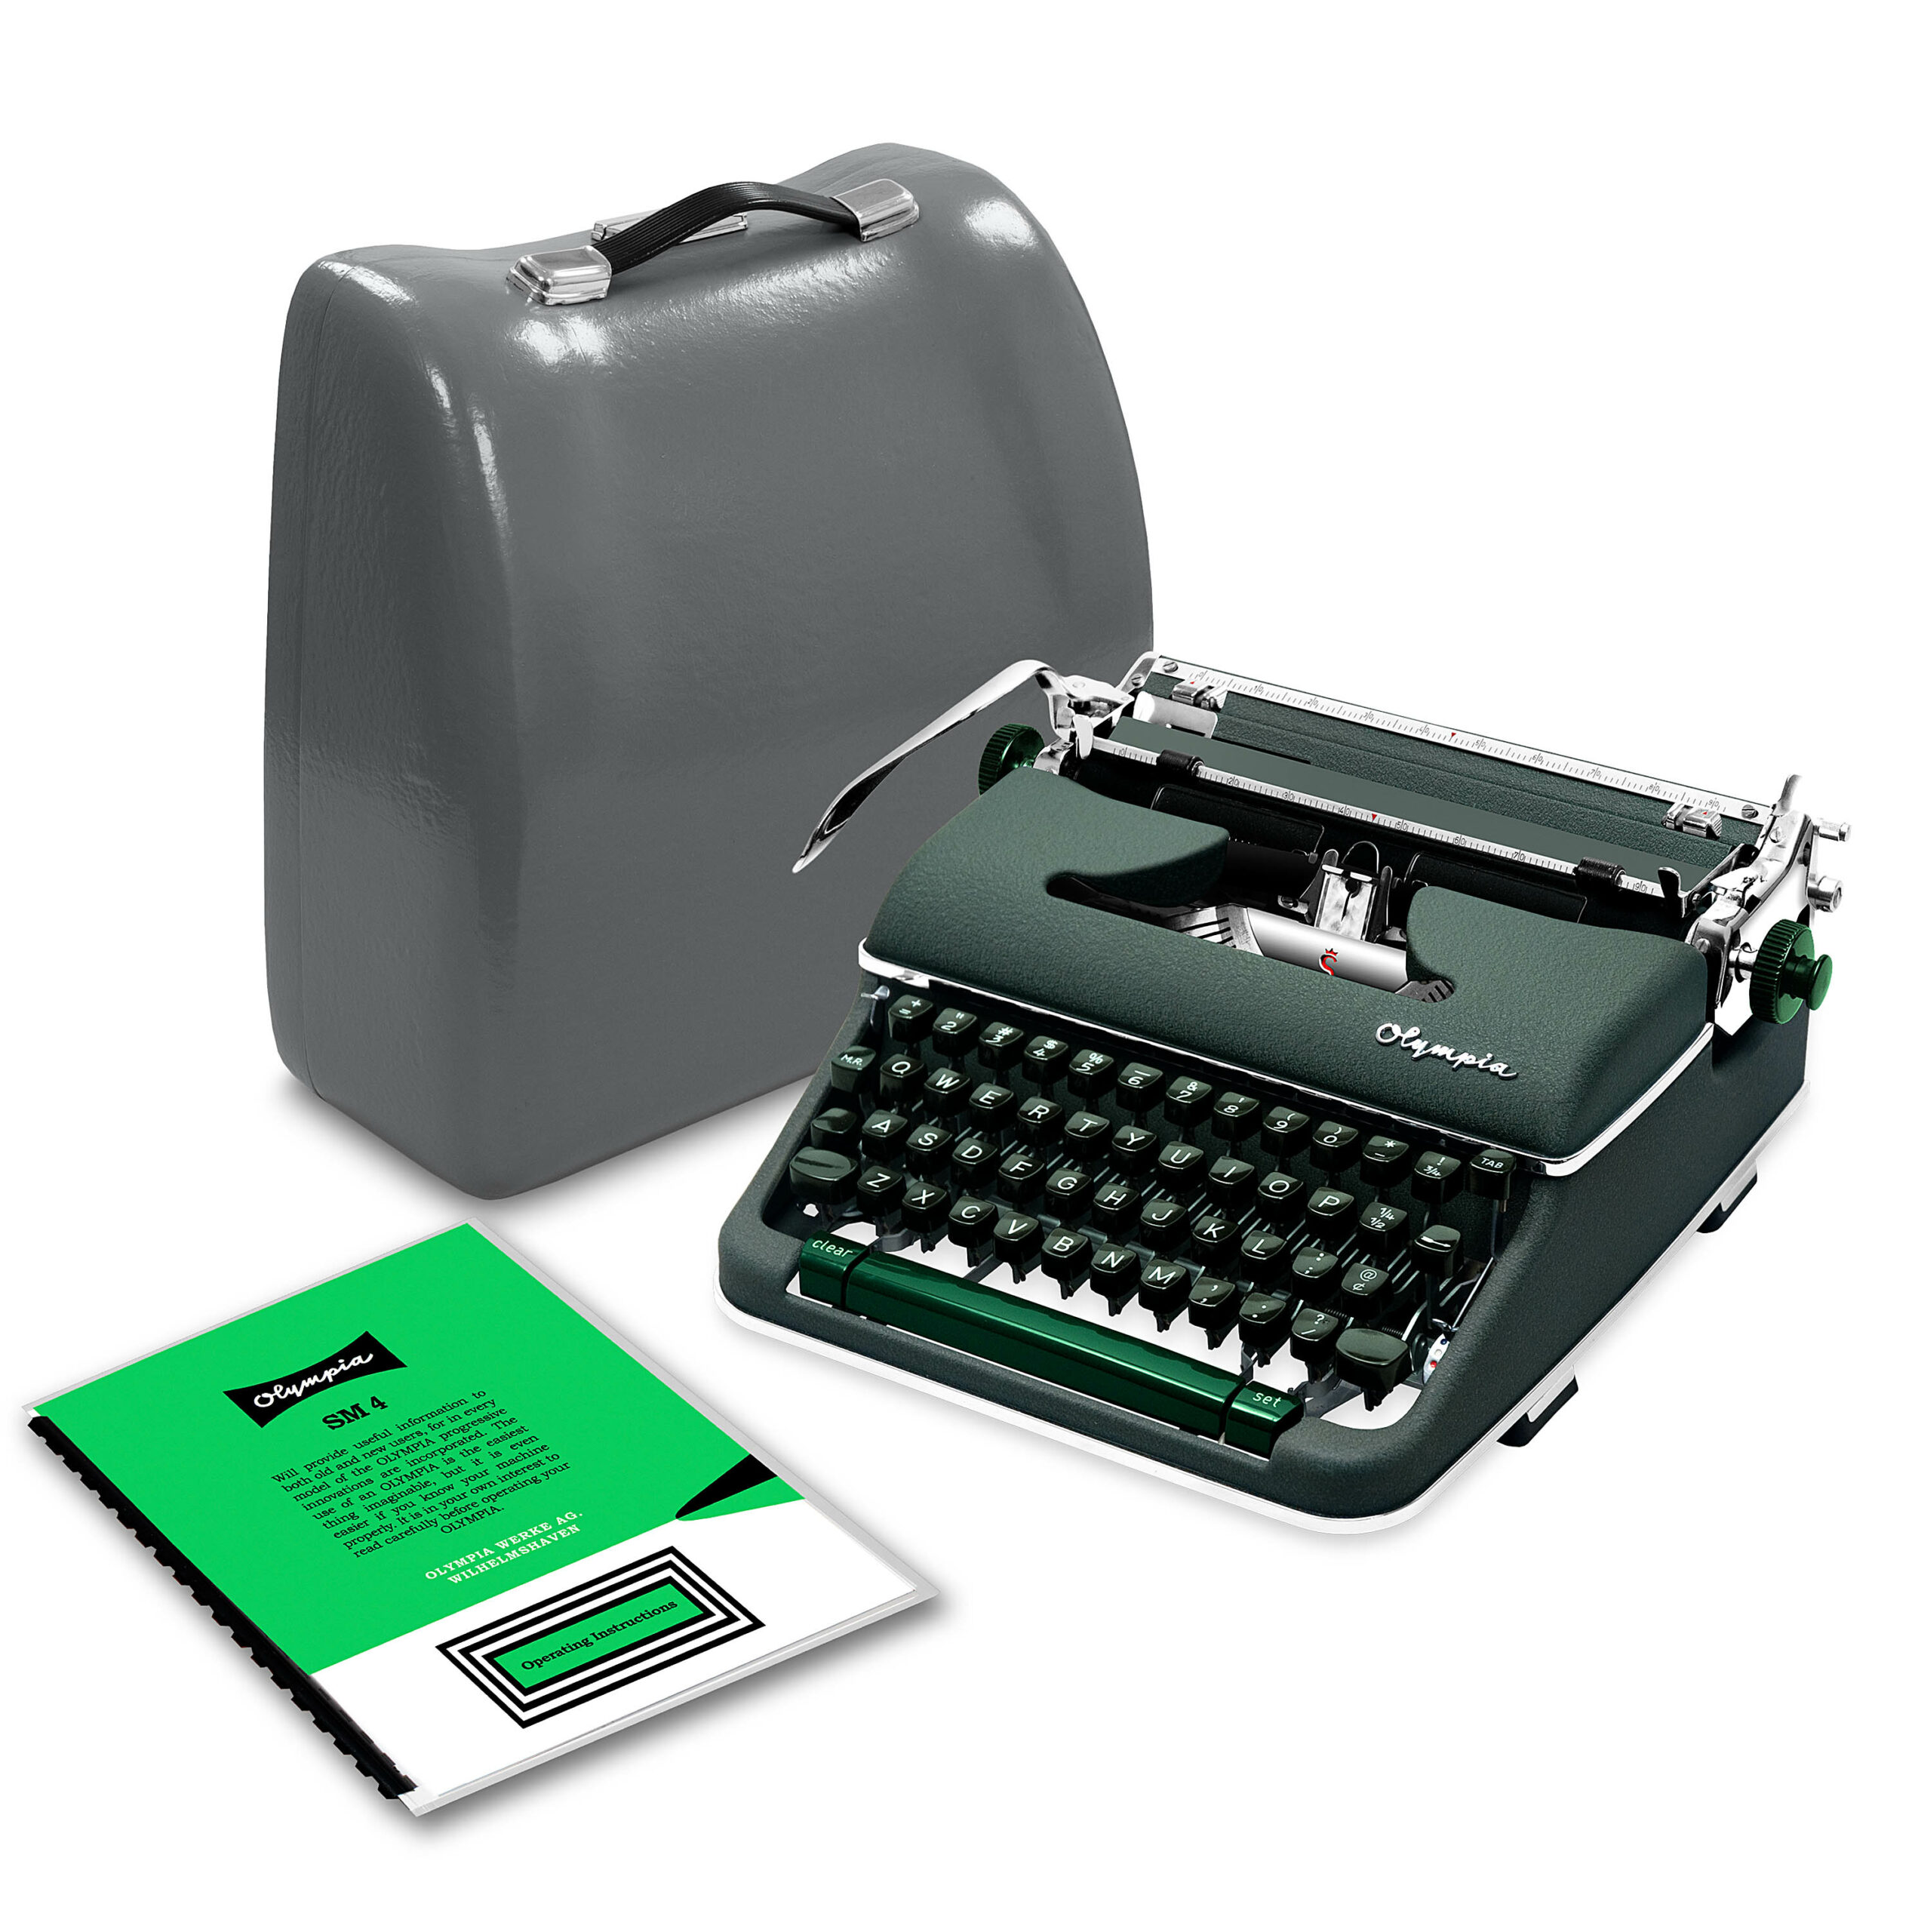 Green 1960 Olympia SM4 Vintage Typewriter for Sale Professionally Restored  (Refurbished)